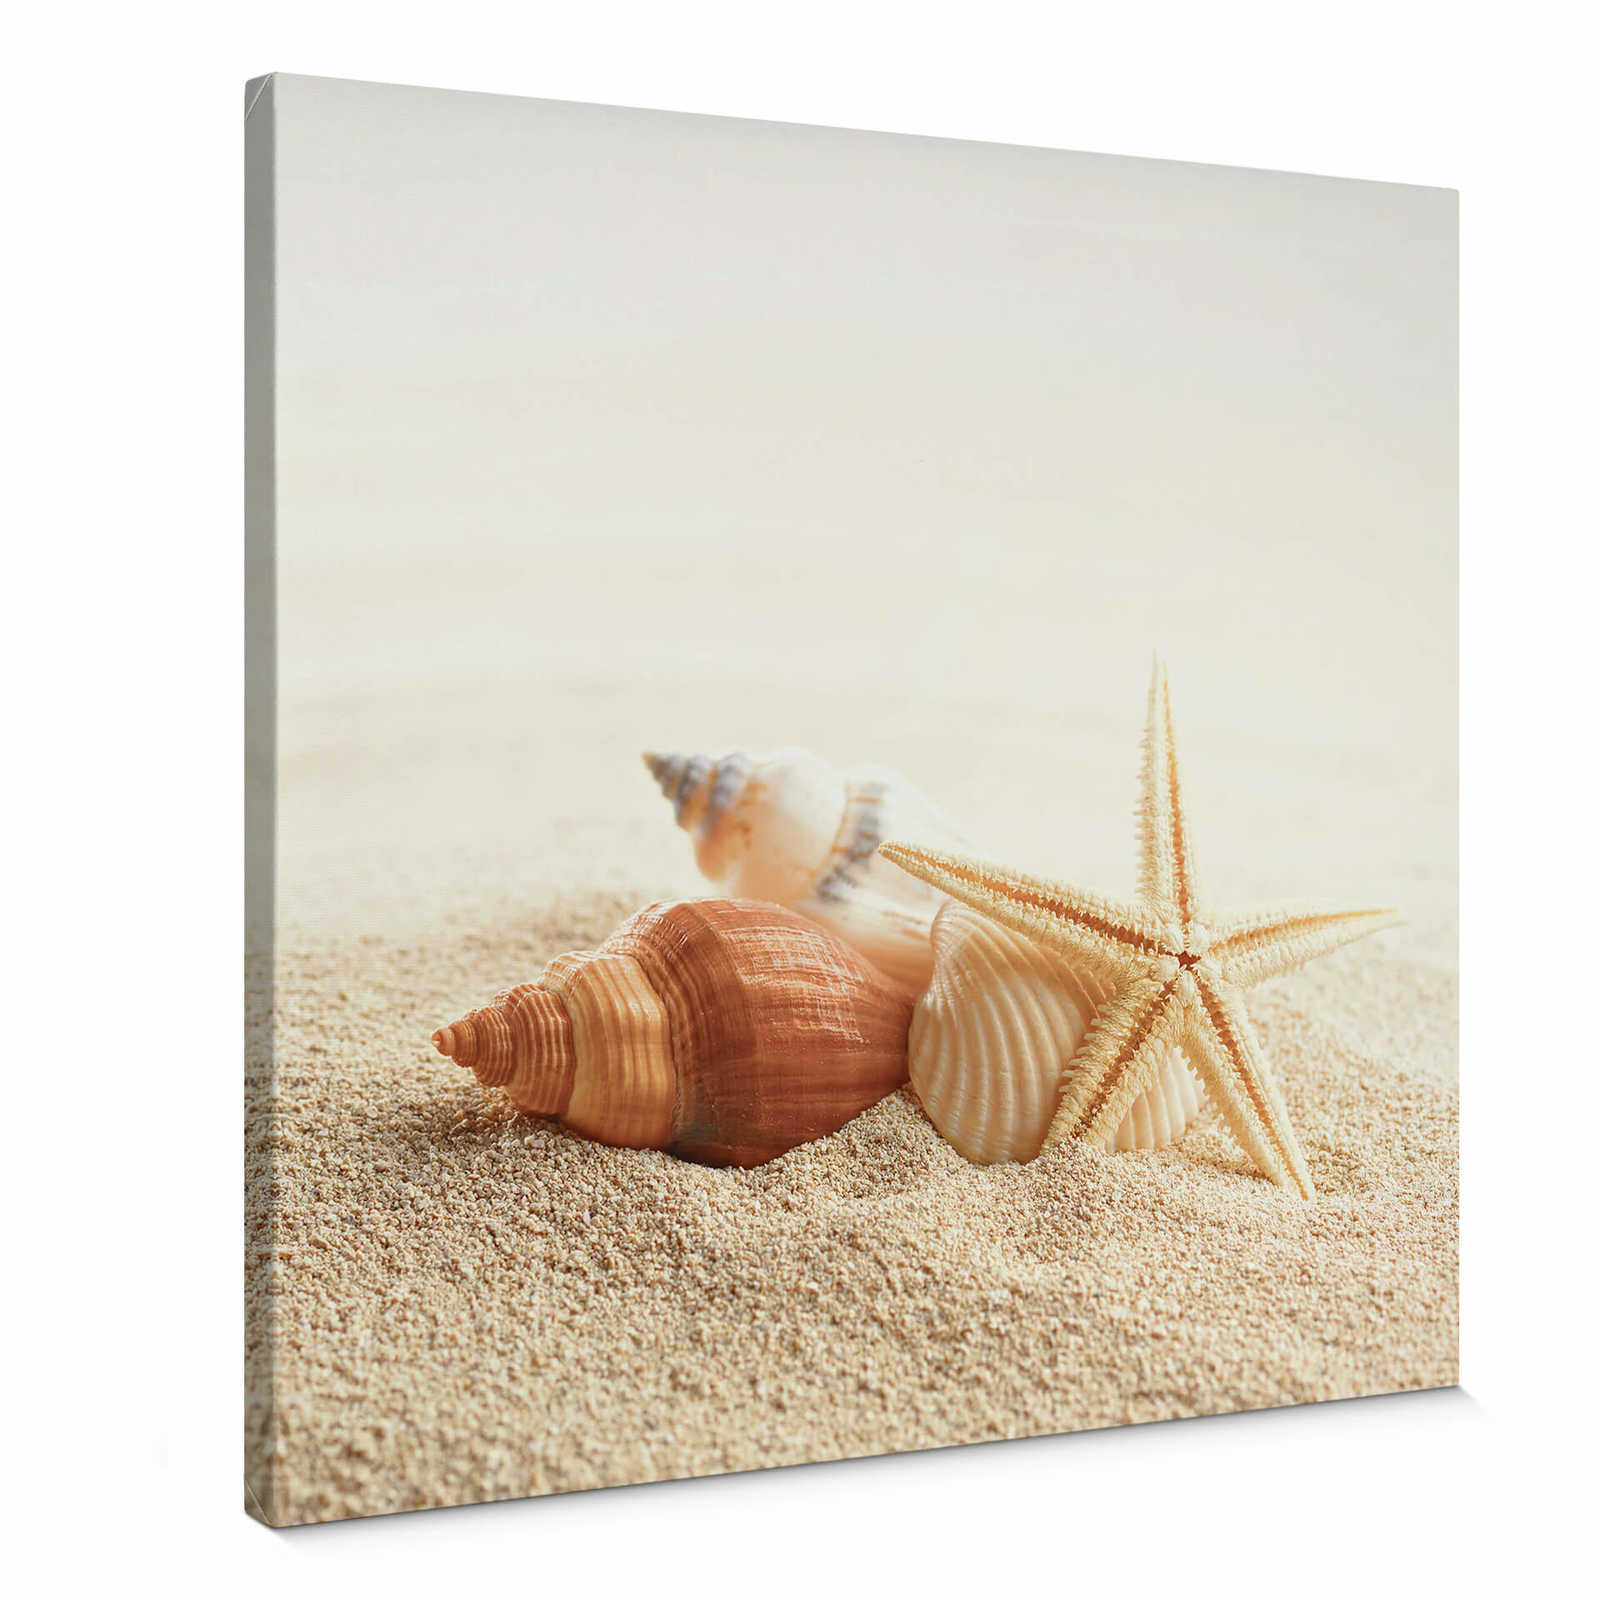         Square canvas picture starfish and shells
    